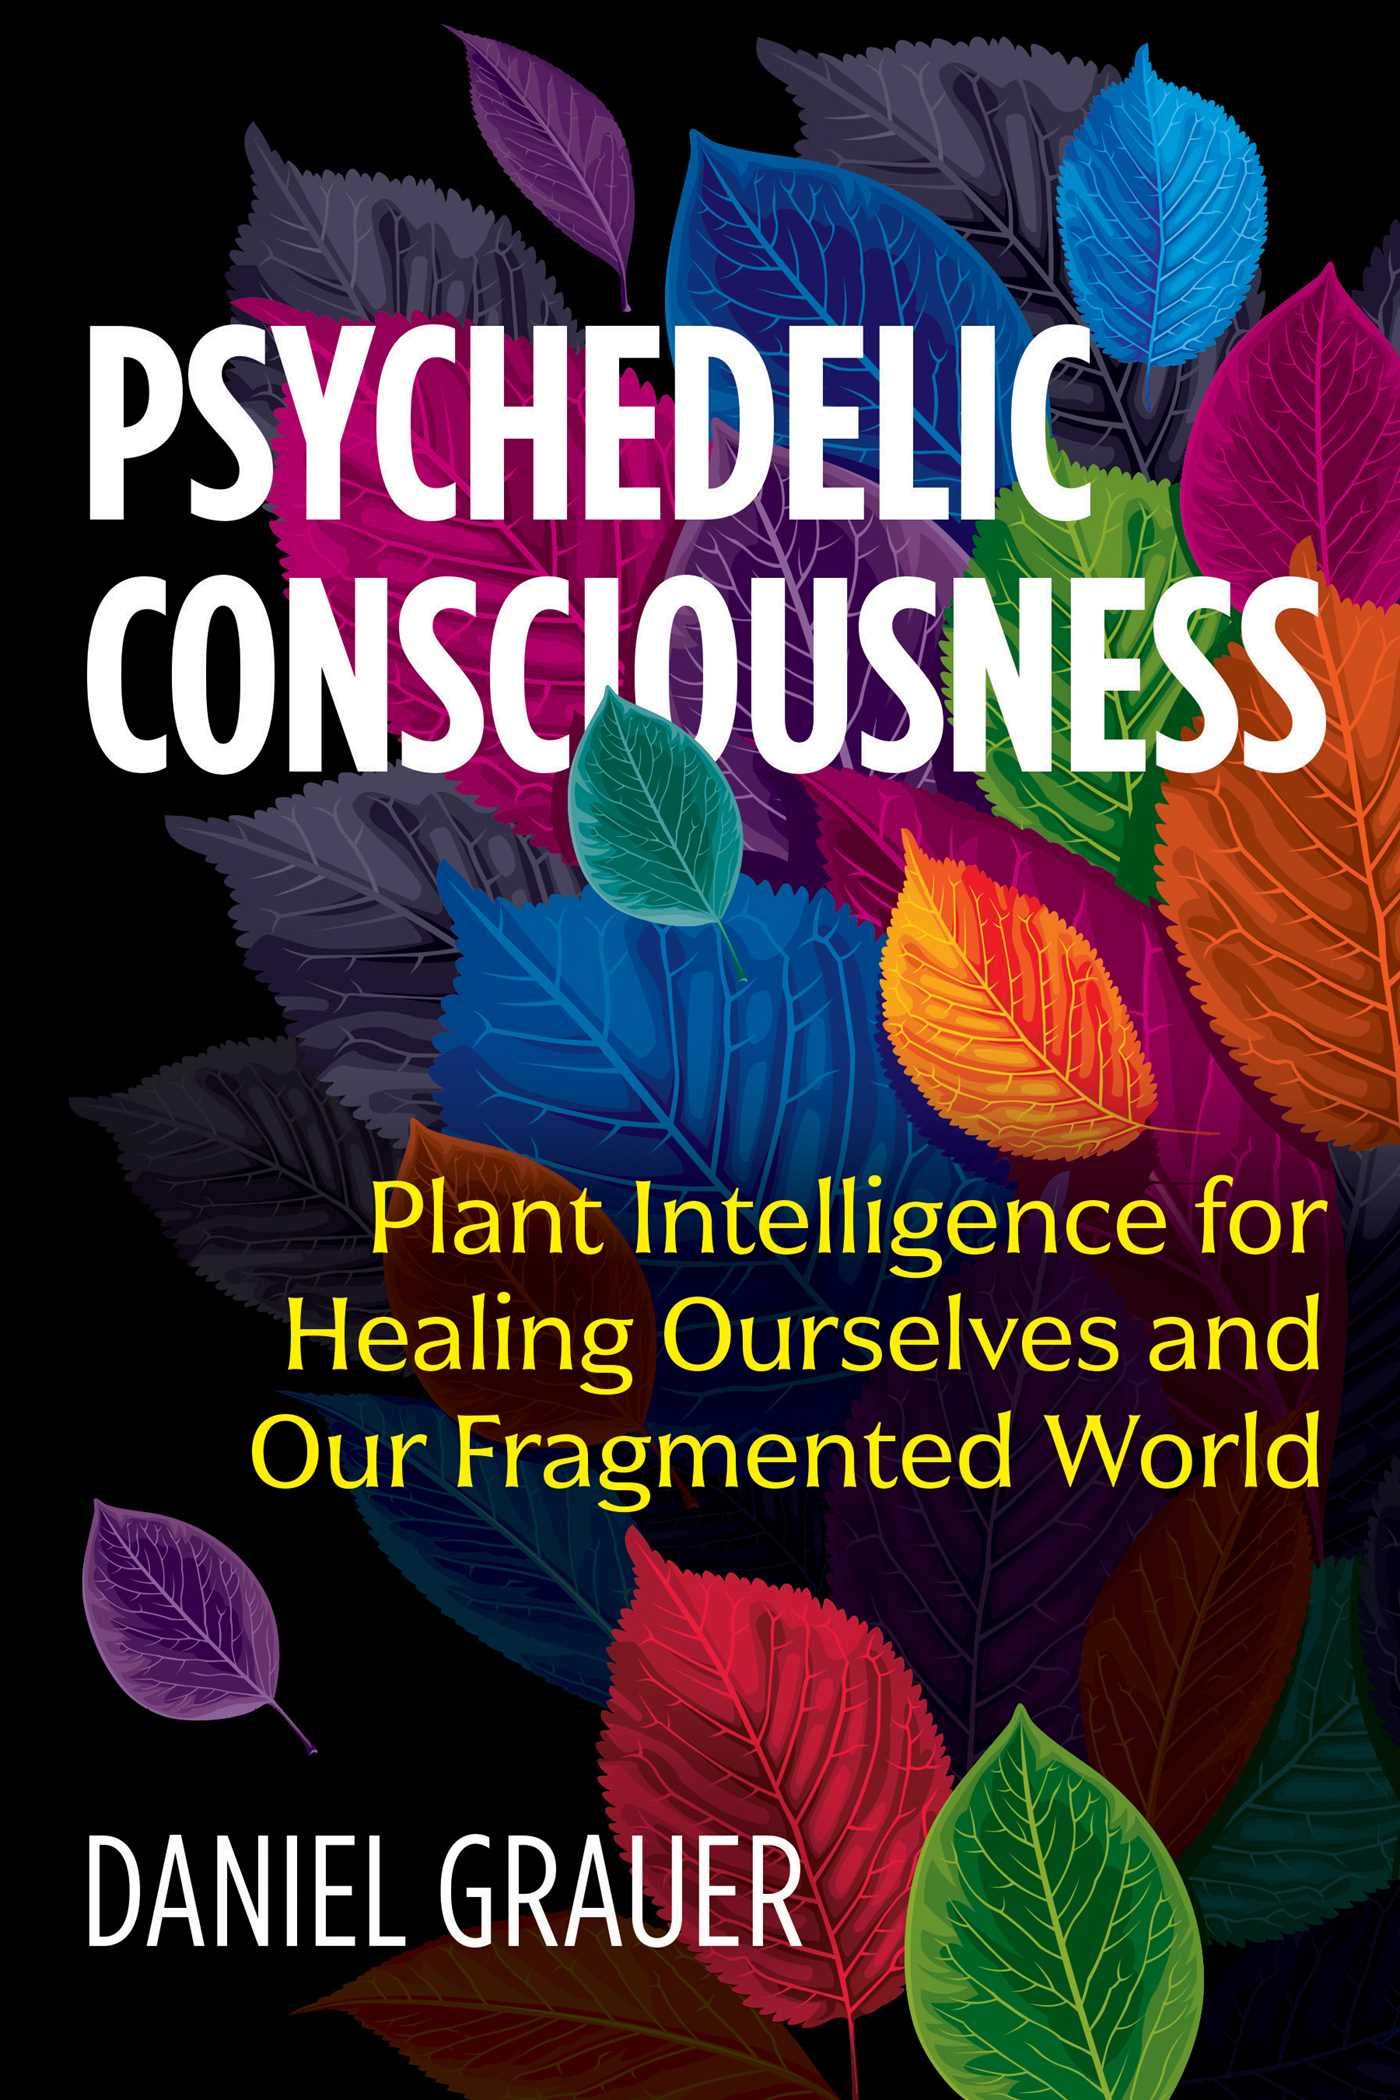 Psychedelic Consciousness; Daniel Grauer